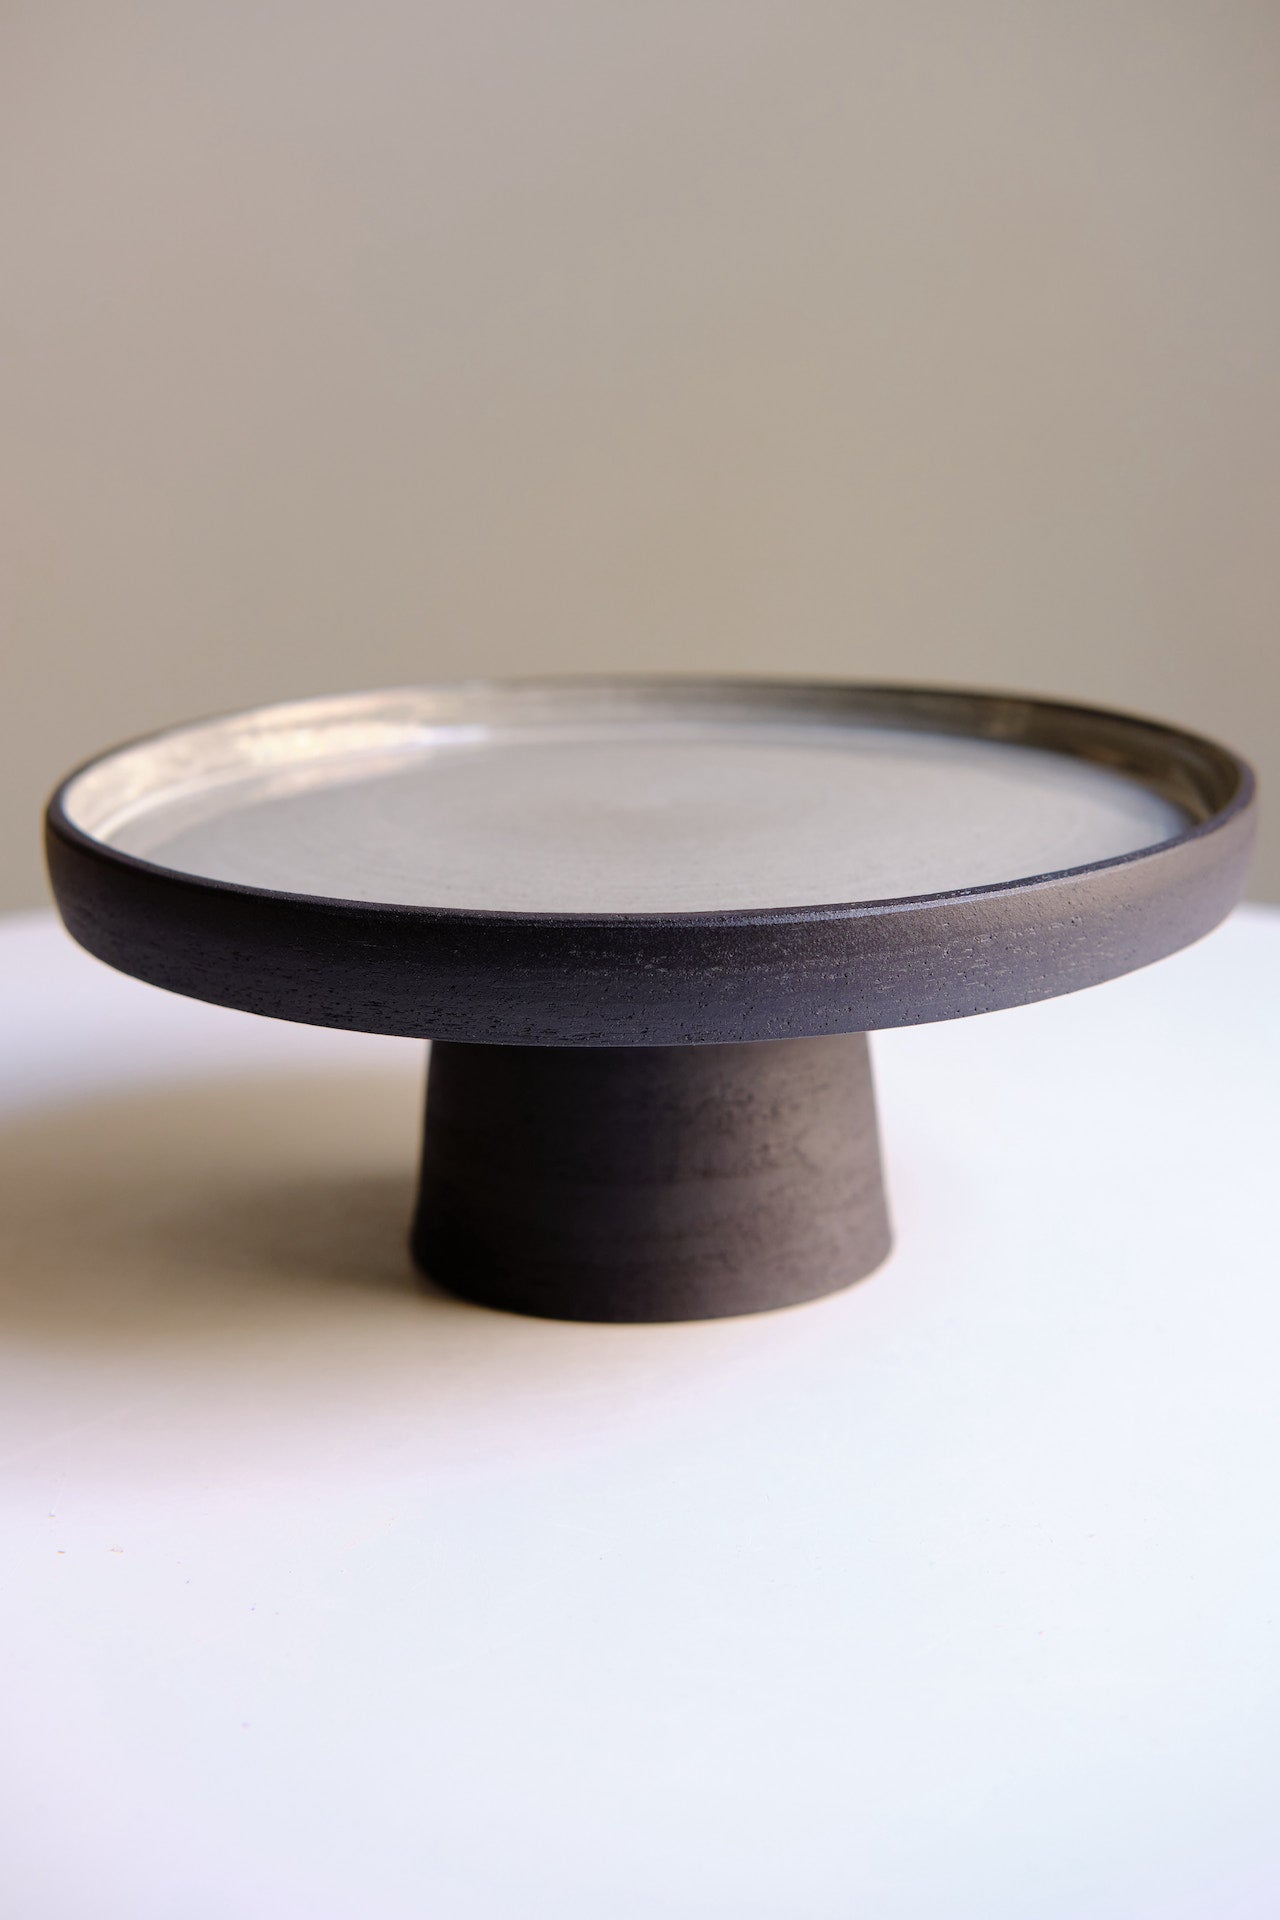 Cake stand in black